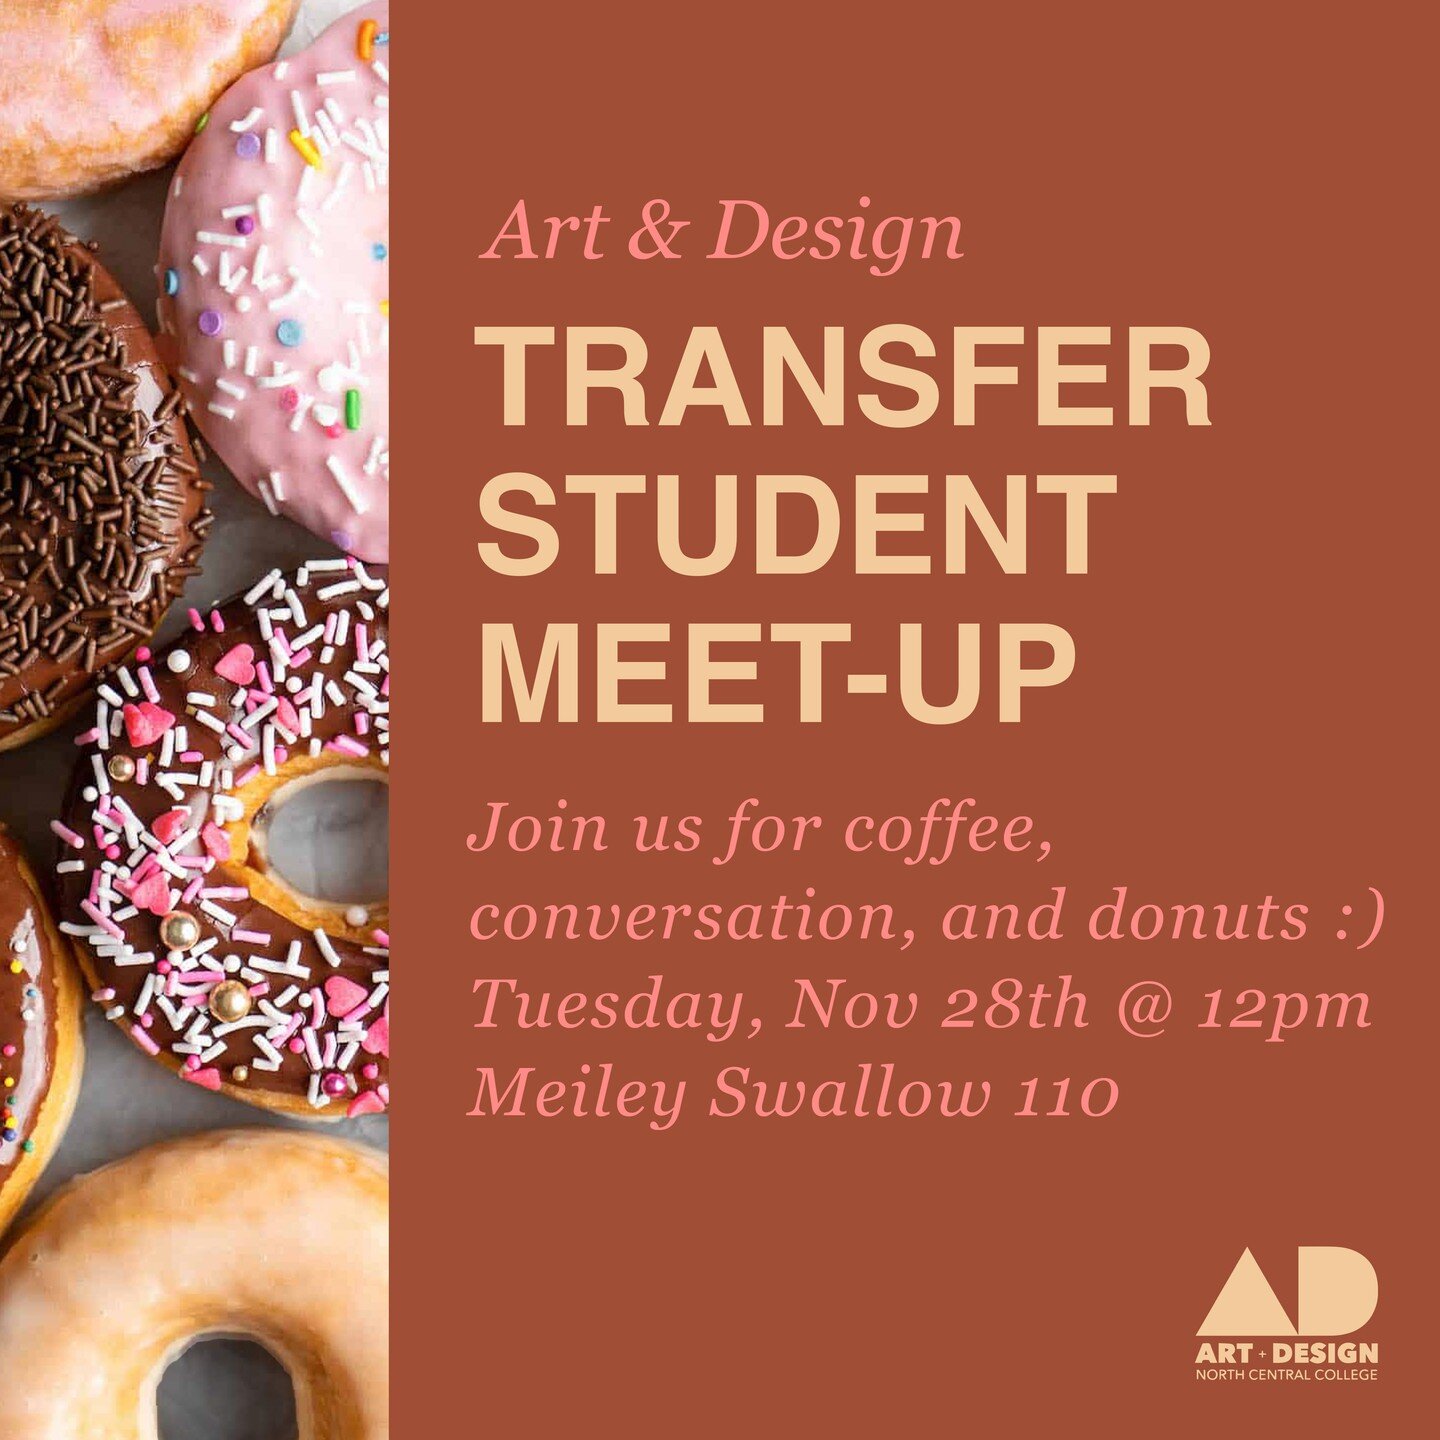 Join us for coffee, conversation, and donuts :)
Tuesday, Nov 28th @ 12pm
Meiley Swallow 110